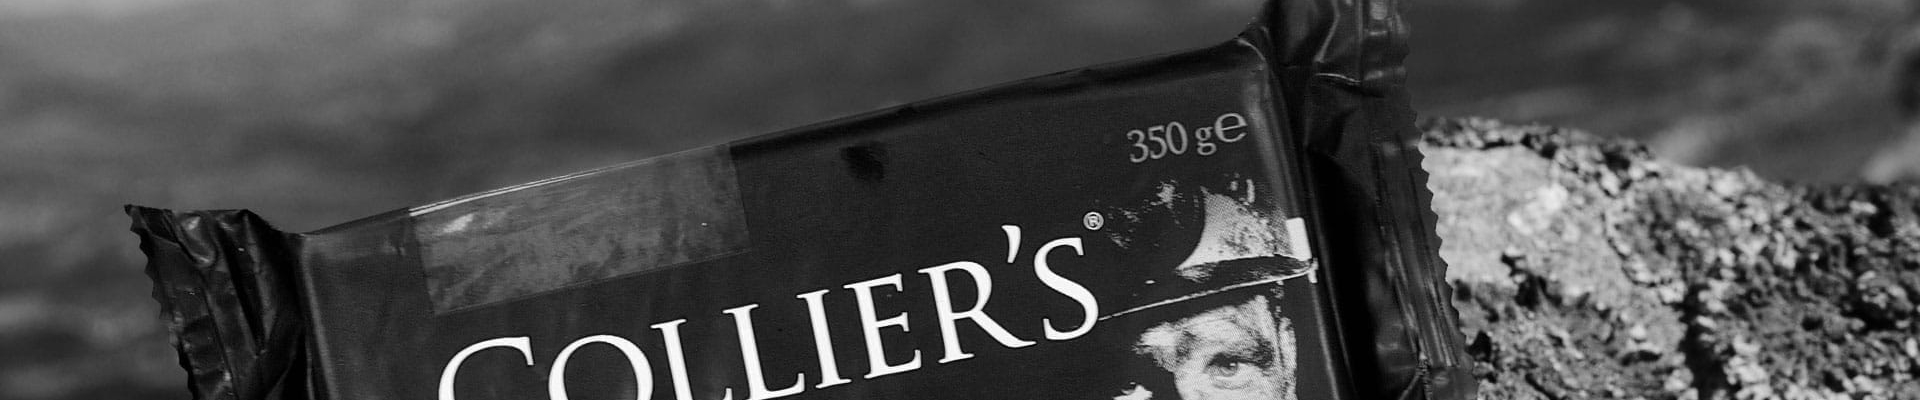 Colliers Cheese News